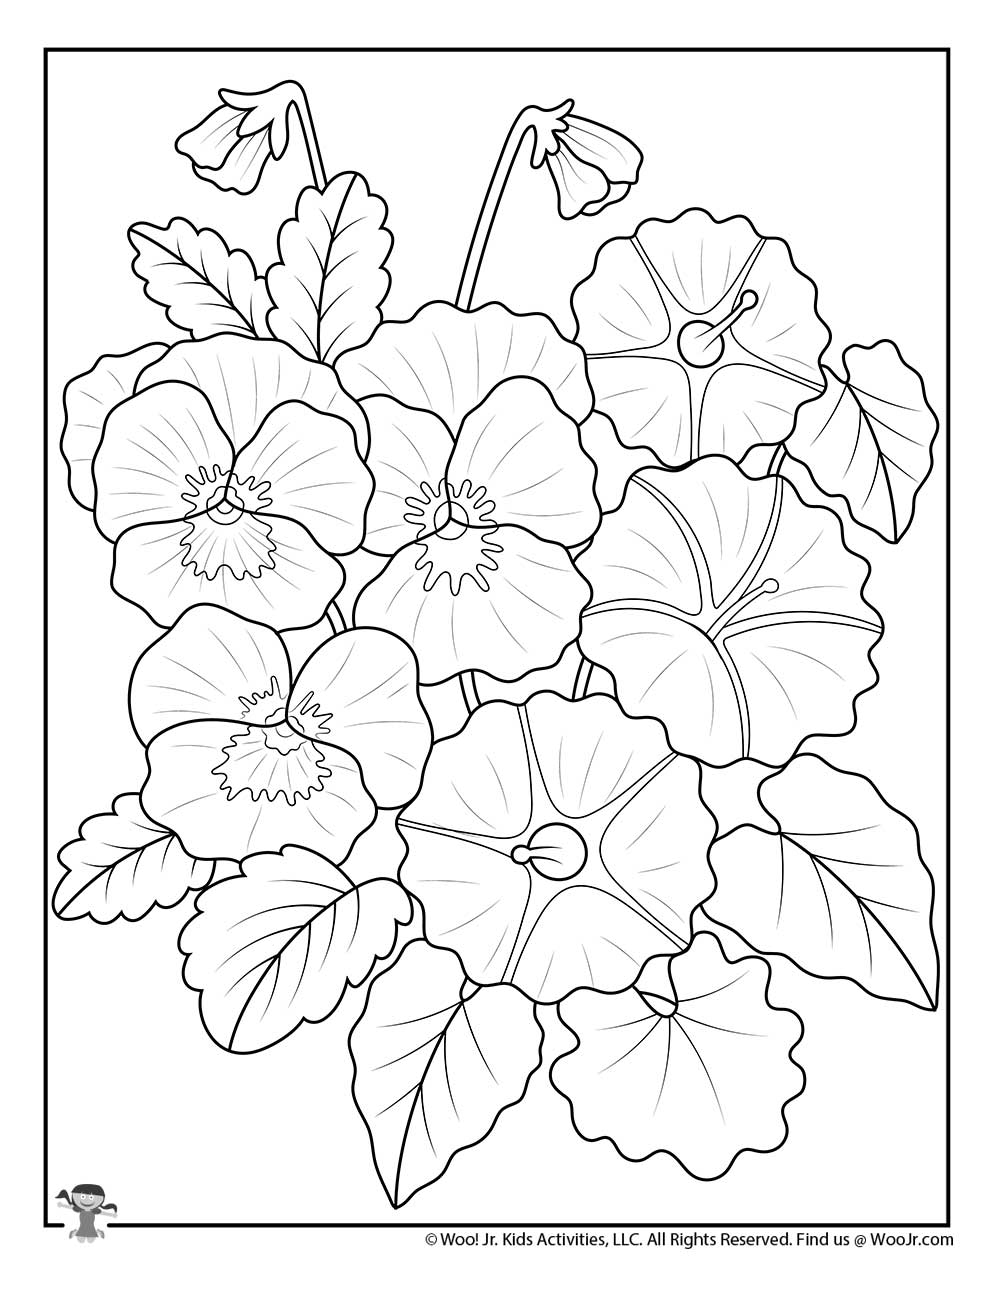 Pansy Flowers Adult Coloring Sheet | Woo! Jr. Kids Activities : Children's  Publishing